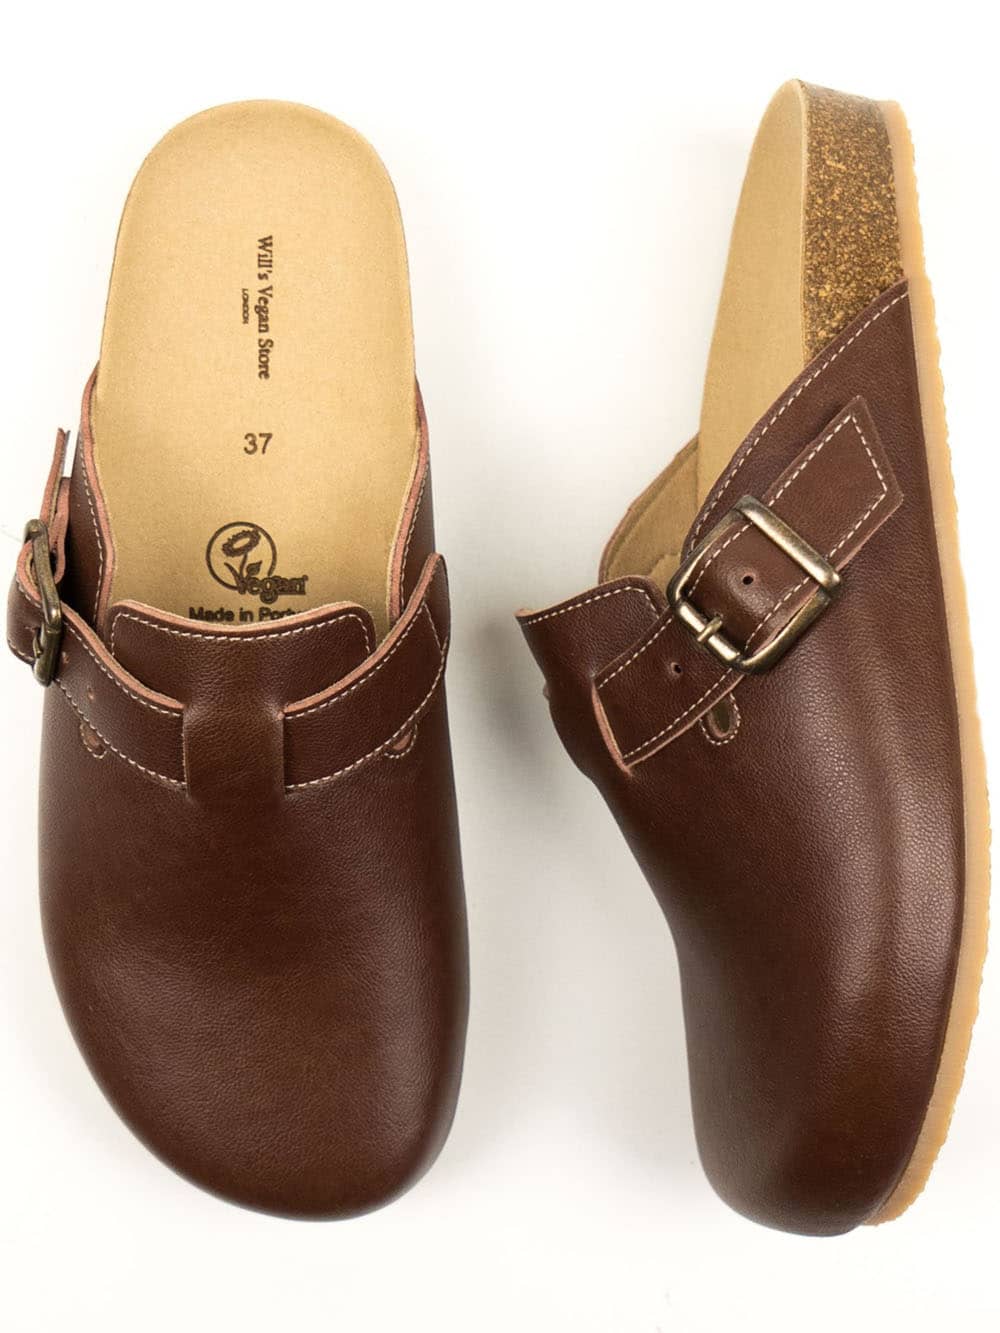 Slip on clogs with brown vegan leather upper